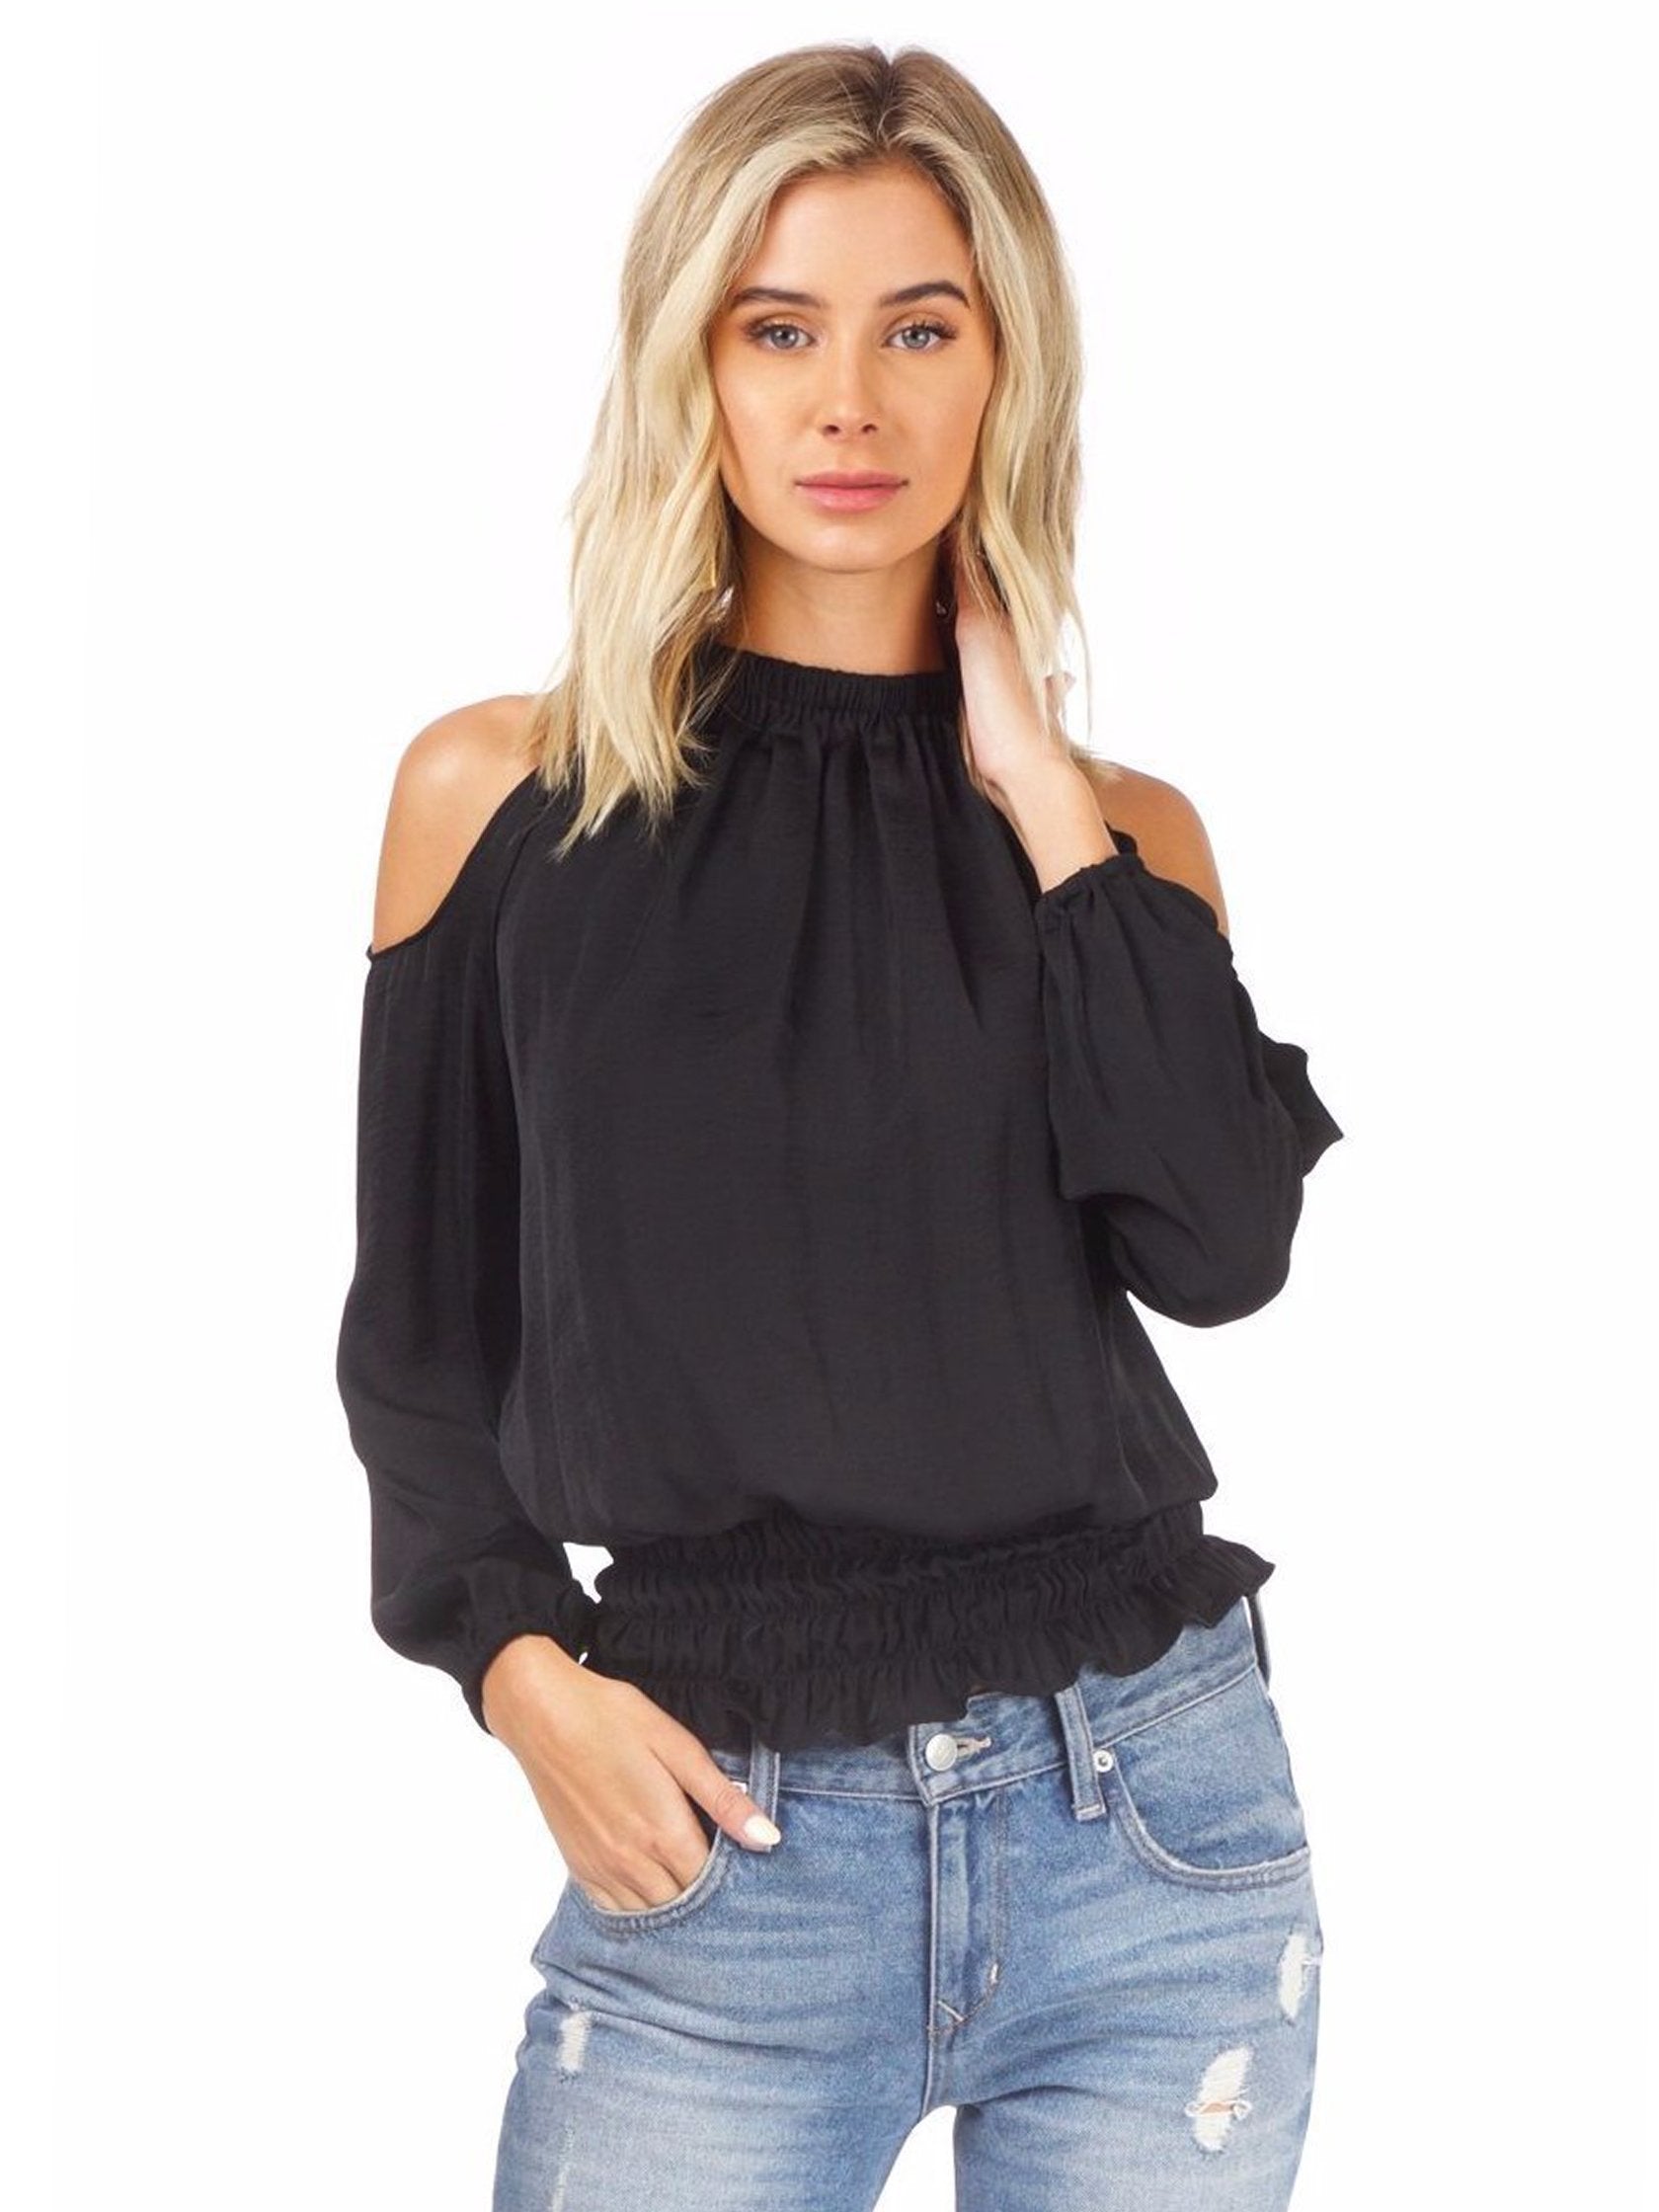 Girl outfit in a top rental from AQUA called Cold Shoulder Top